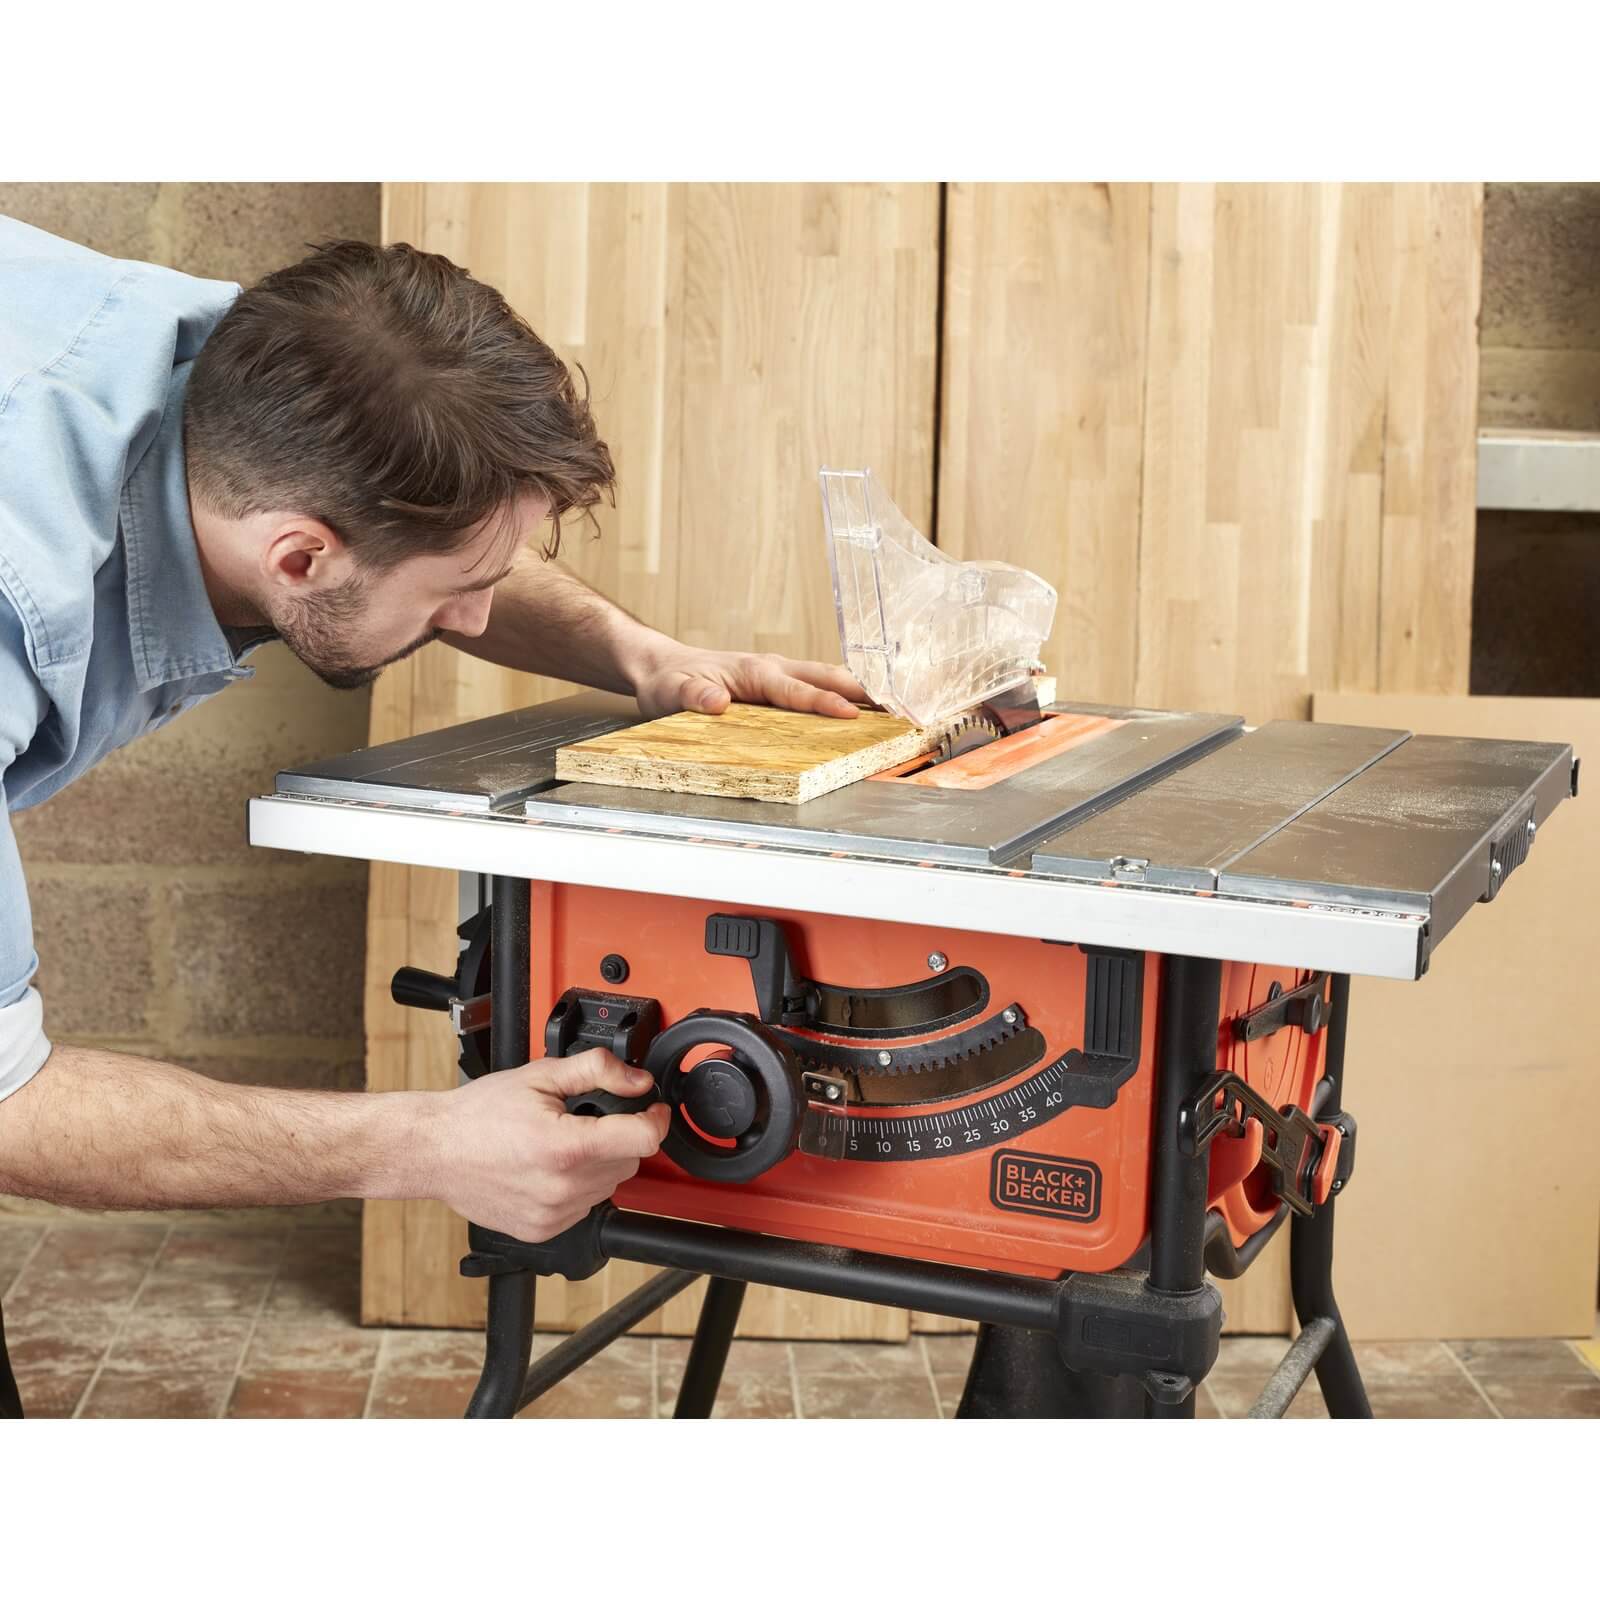 Photo of Black+decker 254mm 1800w Corded Table Saw -bes720-gb-